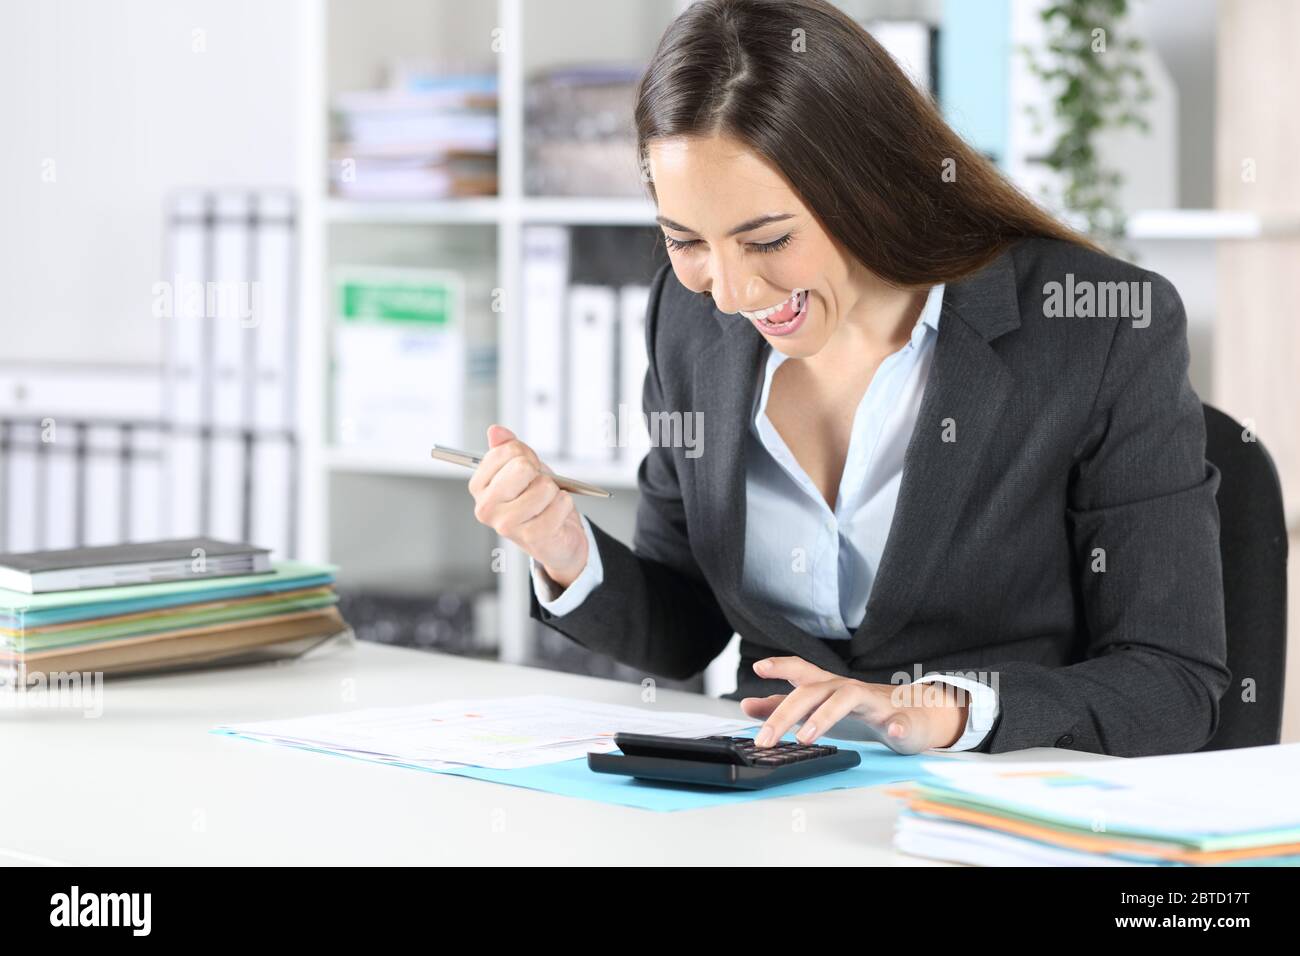 Excited bookkeeper woman checking calculator results sitting on a desk at the office Stock Photo